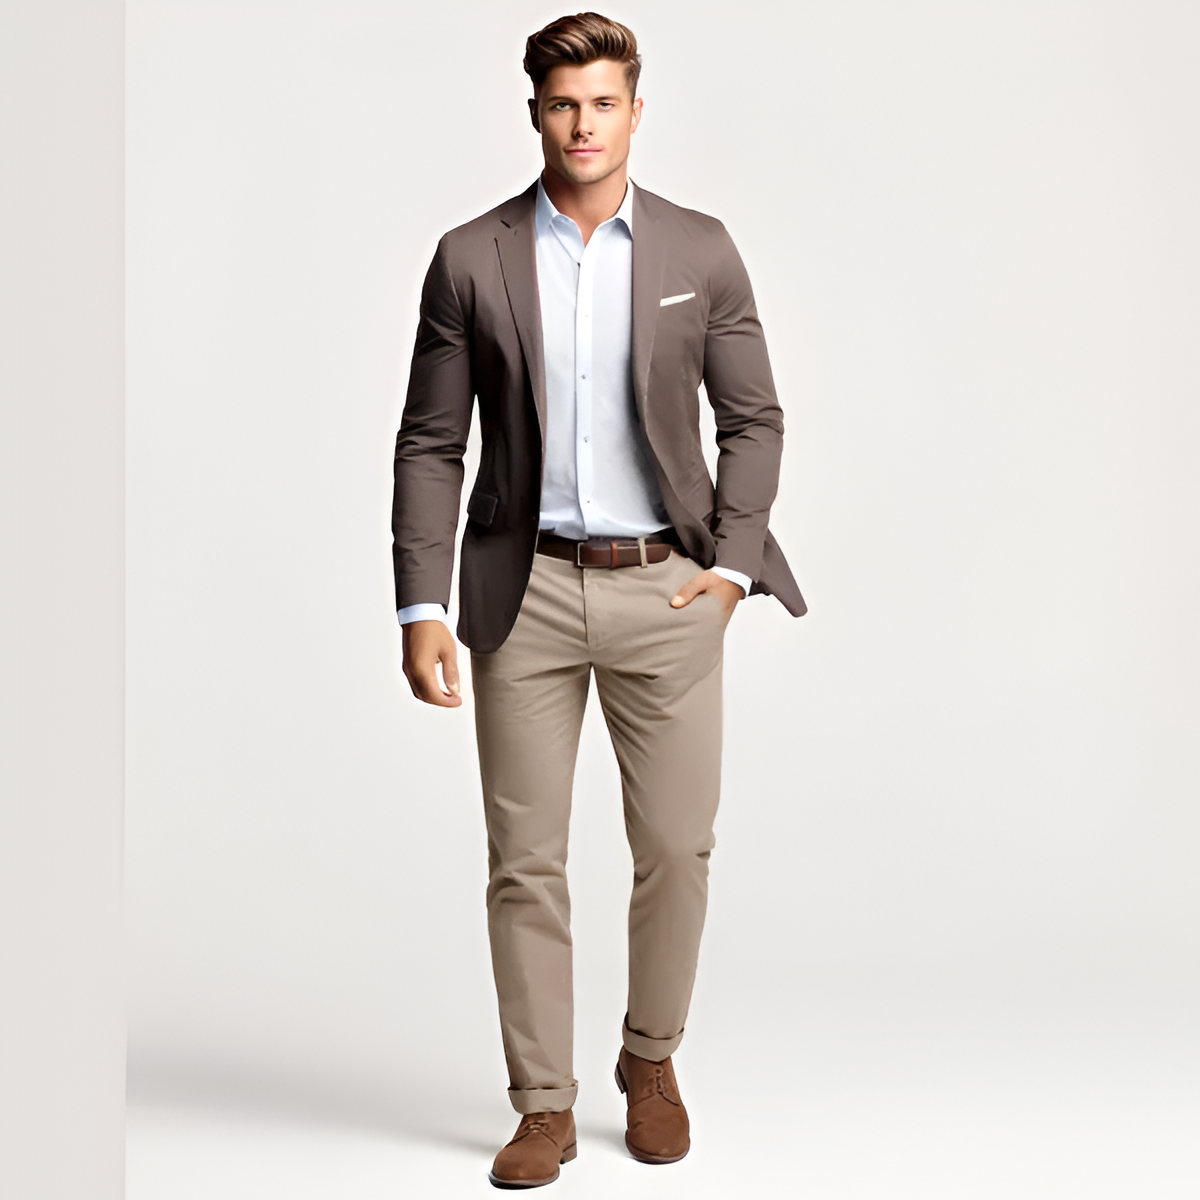 A man wearing a smart casual outfit